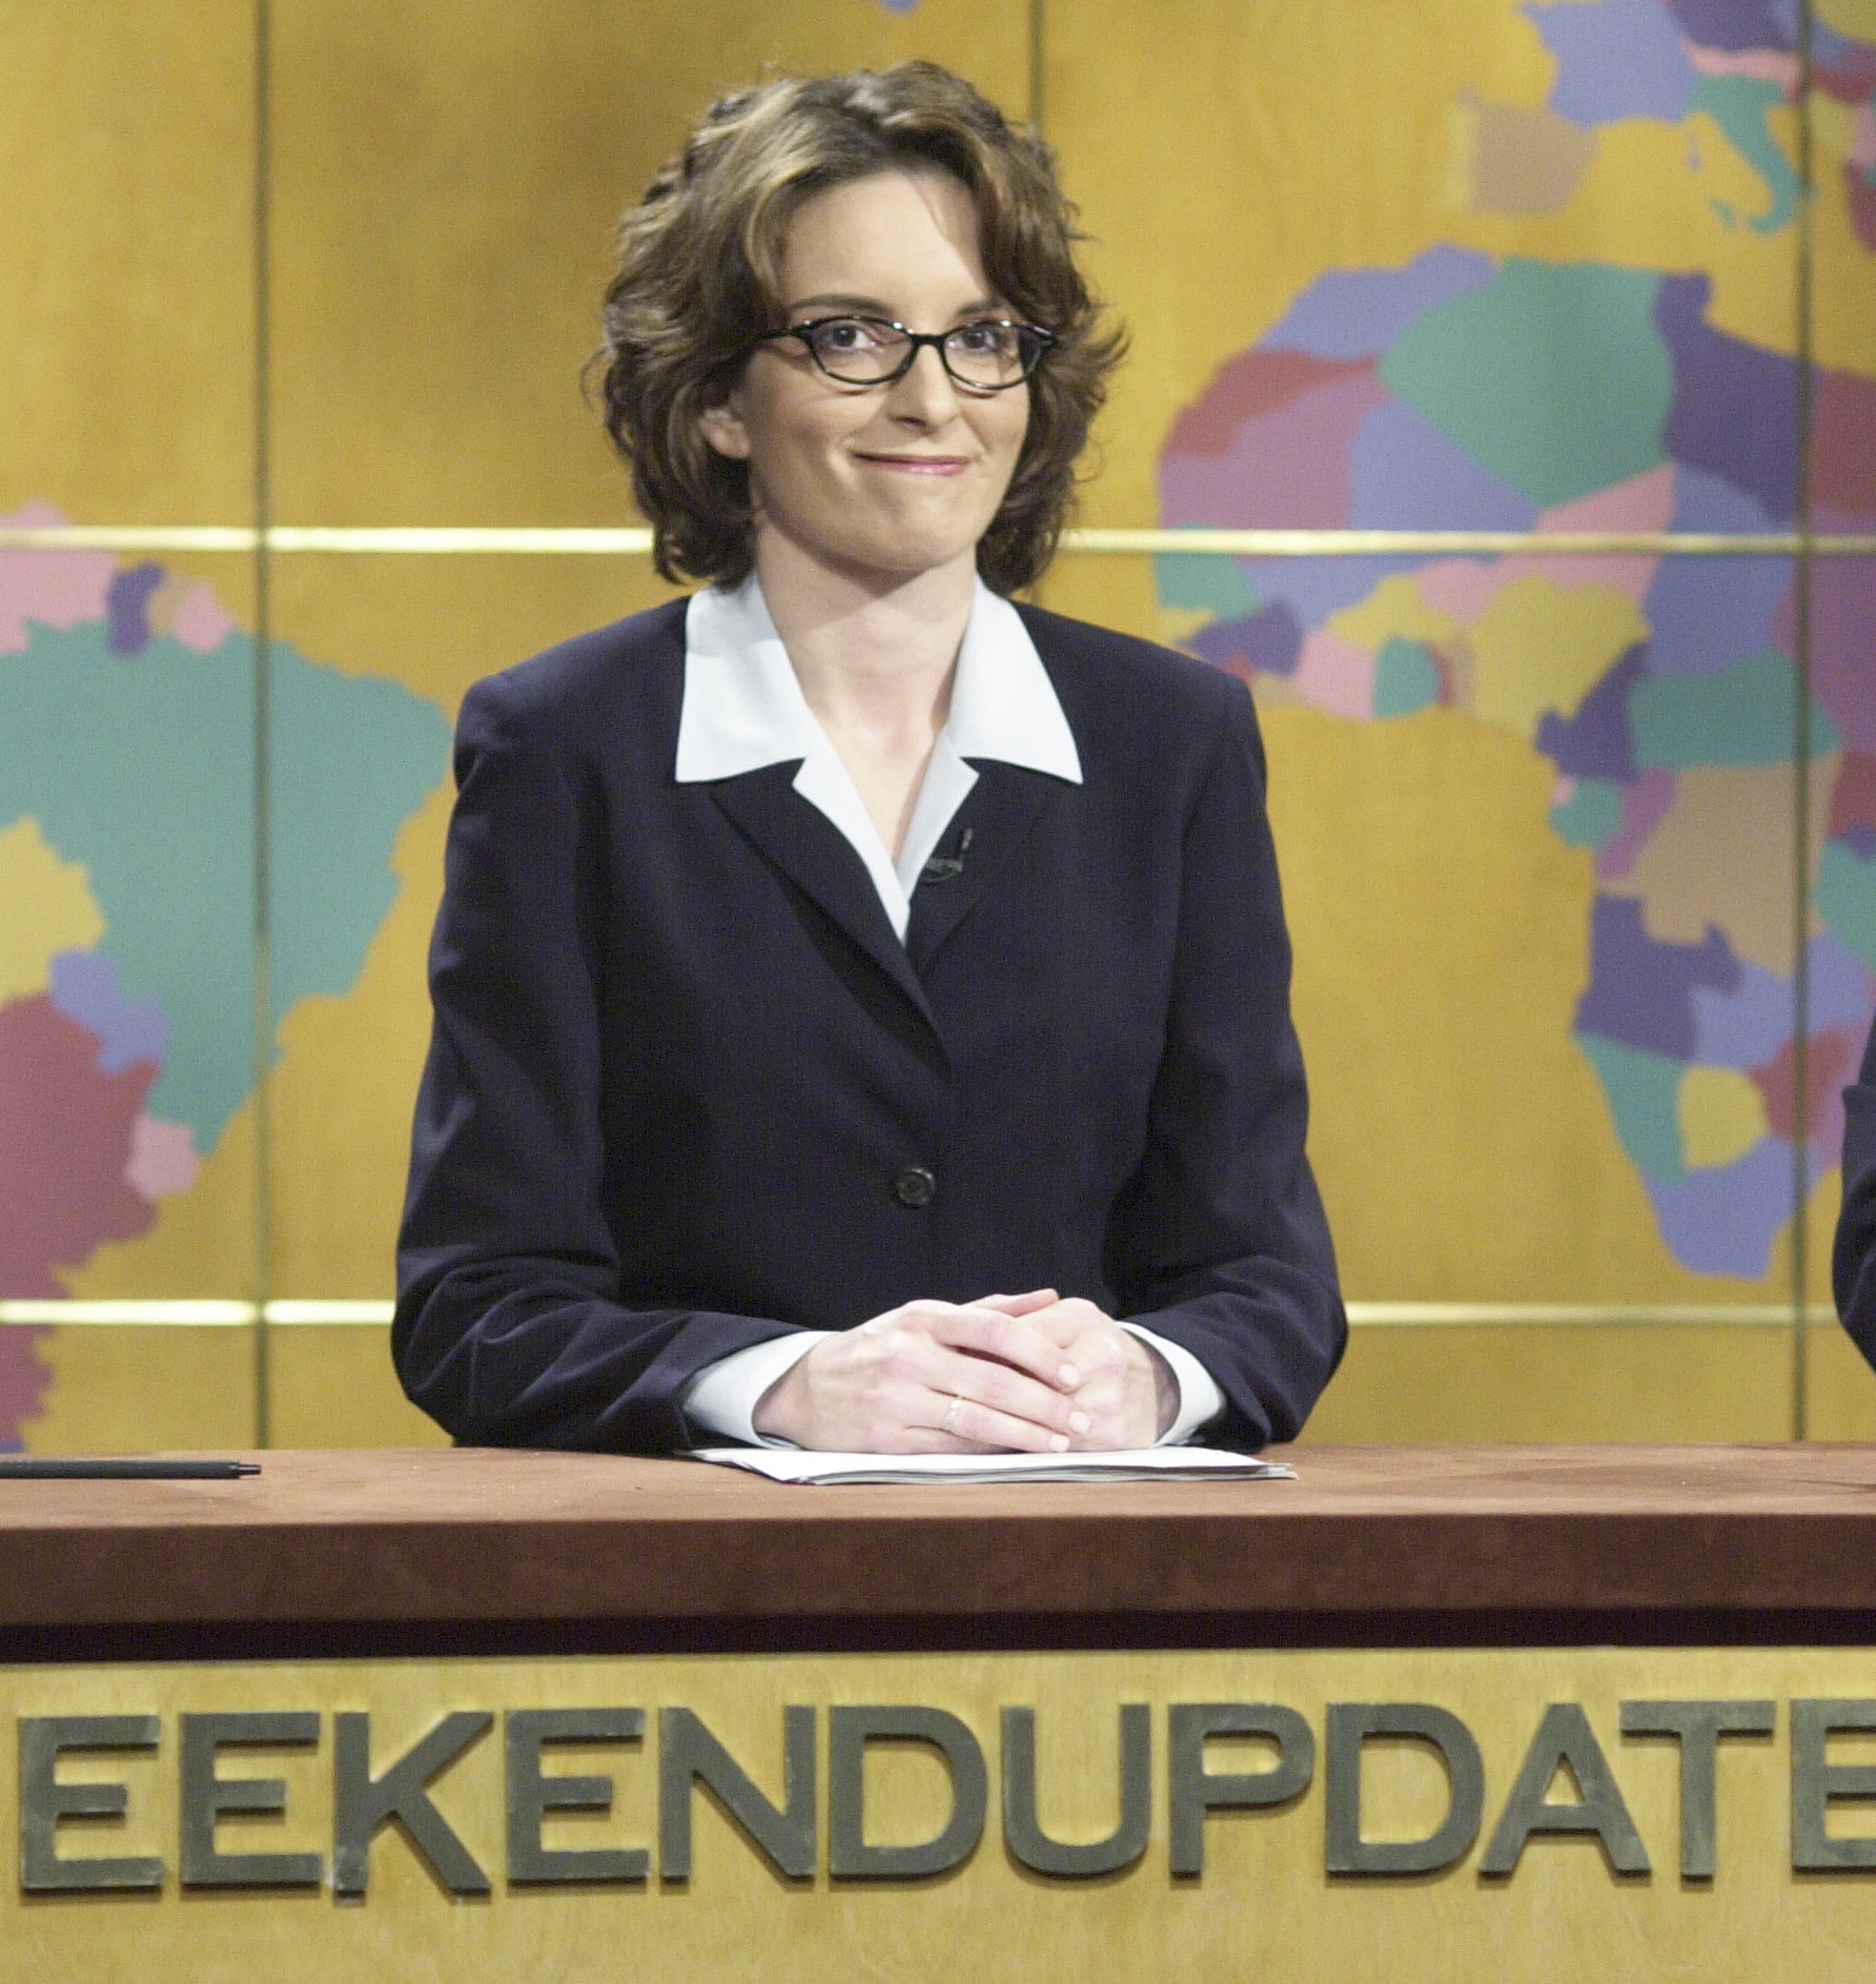 Tina Fey during &quot;Weekend Update&quot; on December 16, 2000